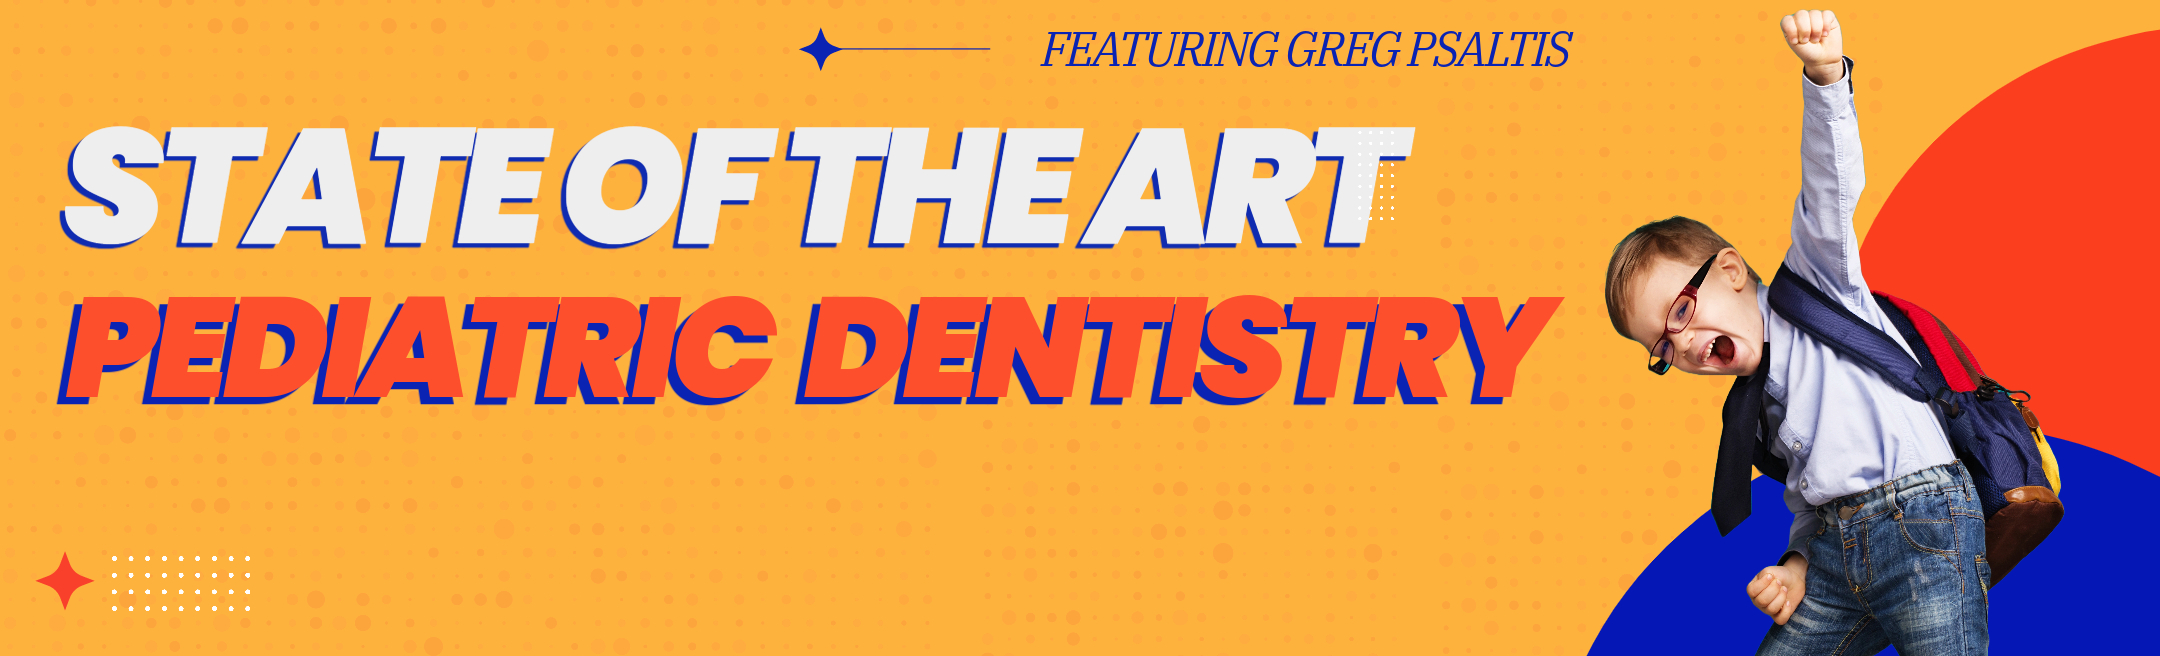 State-of-the-Art Pediatric Dentistry